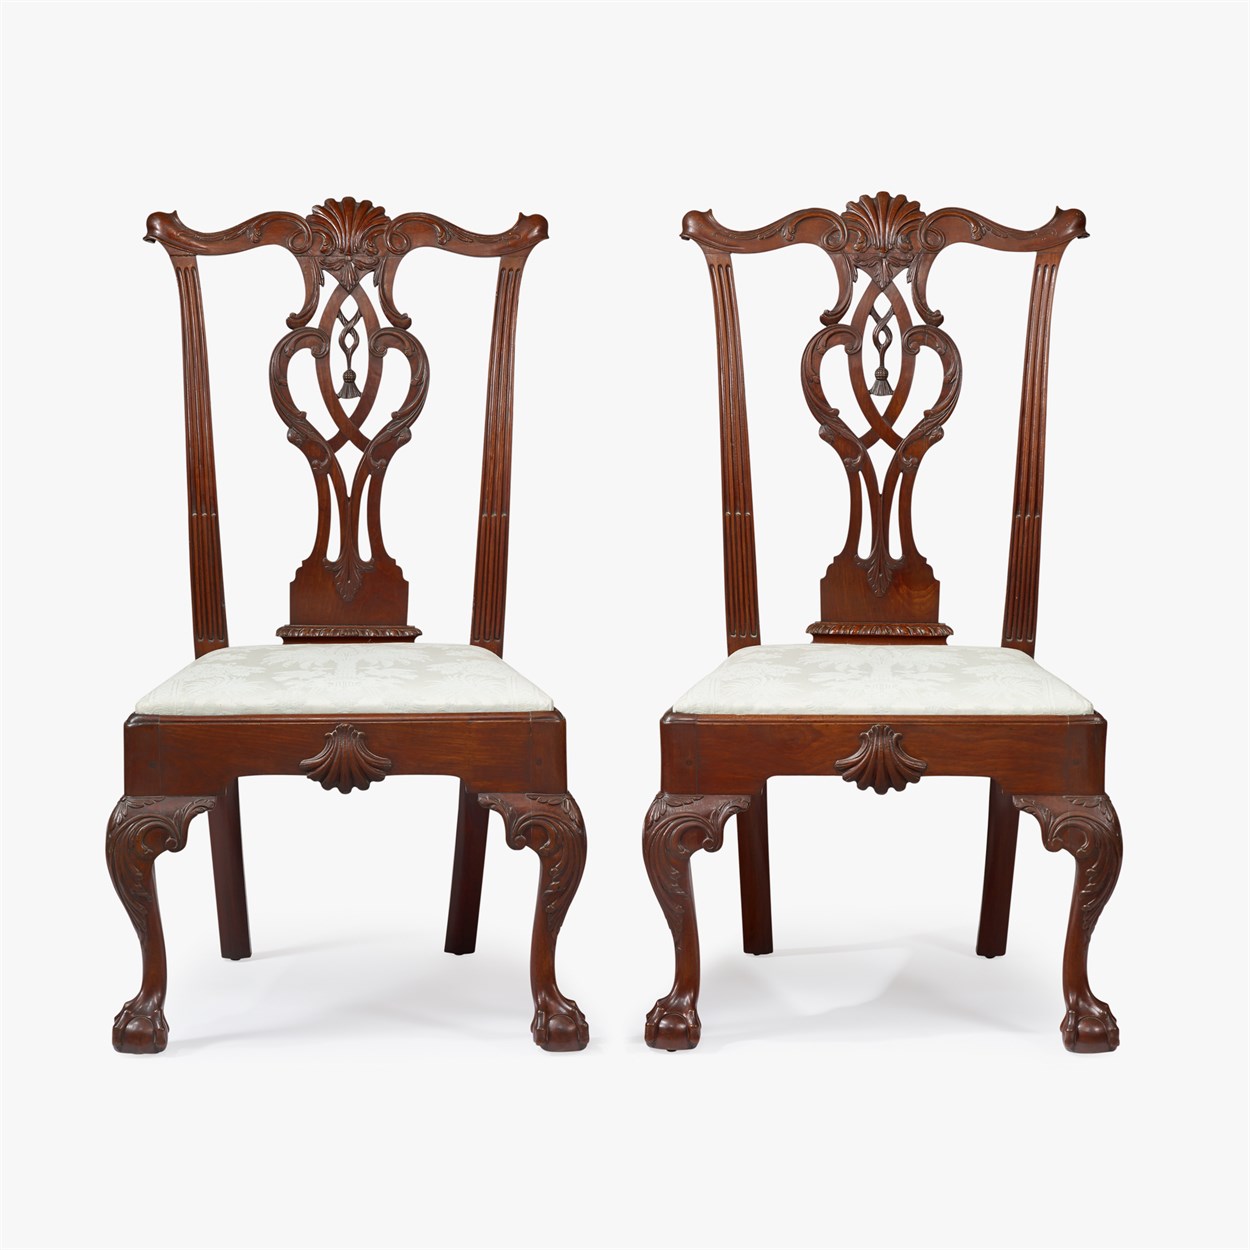 Lot 51 - The Justice Samuel Chase pair of fine Chippendale carved mahogany tassel-back side chairs